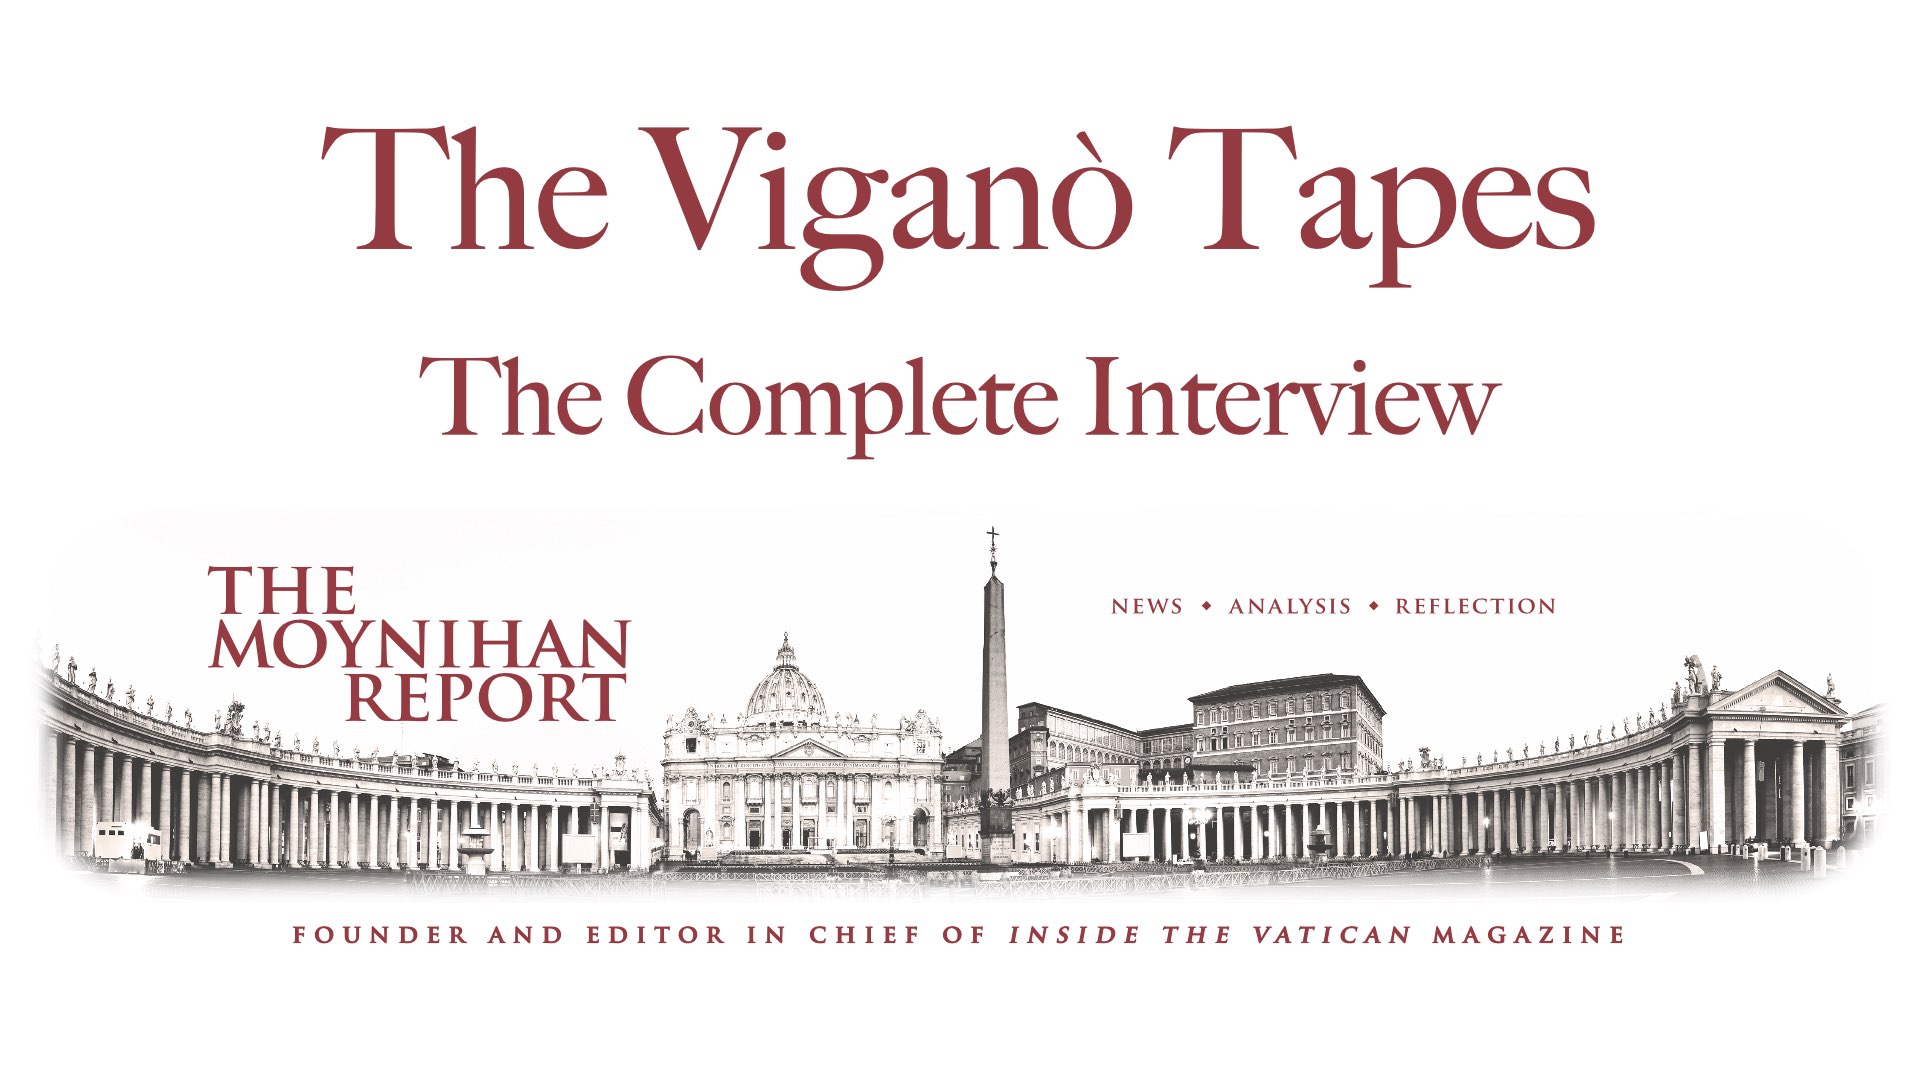 The Vigano Tapes